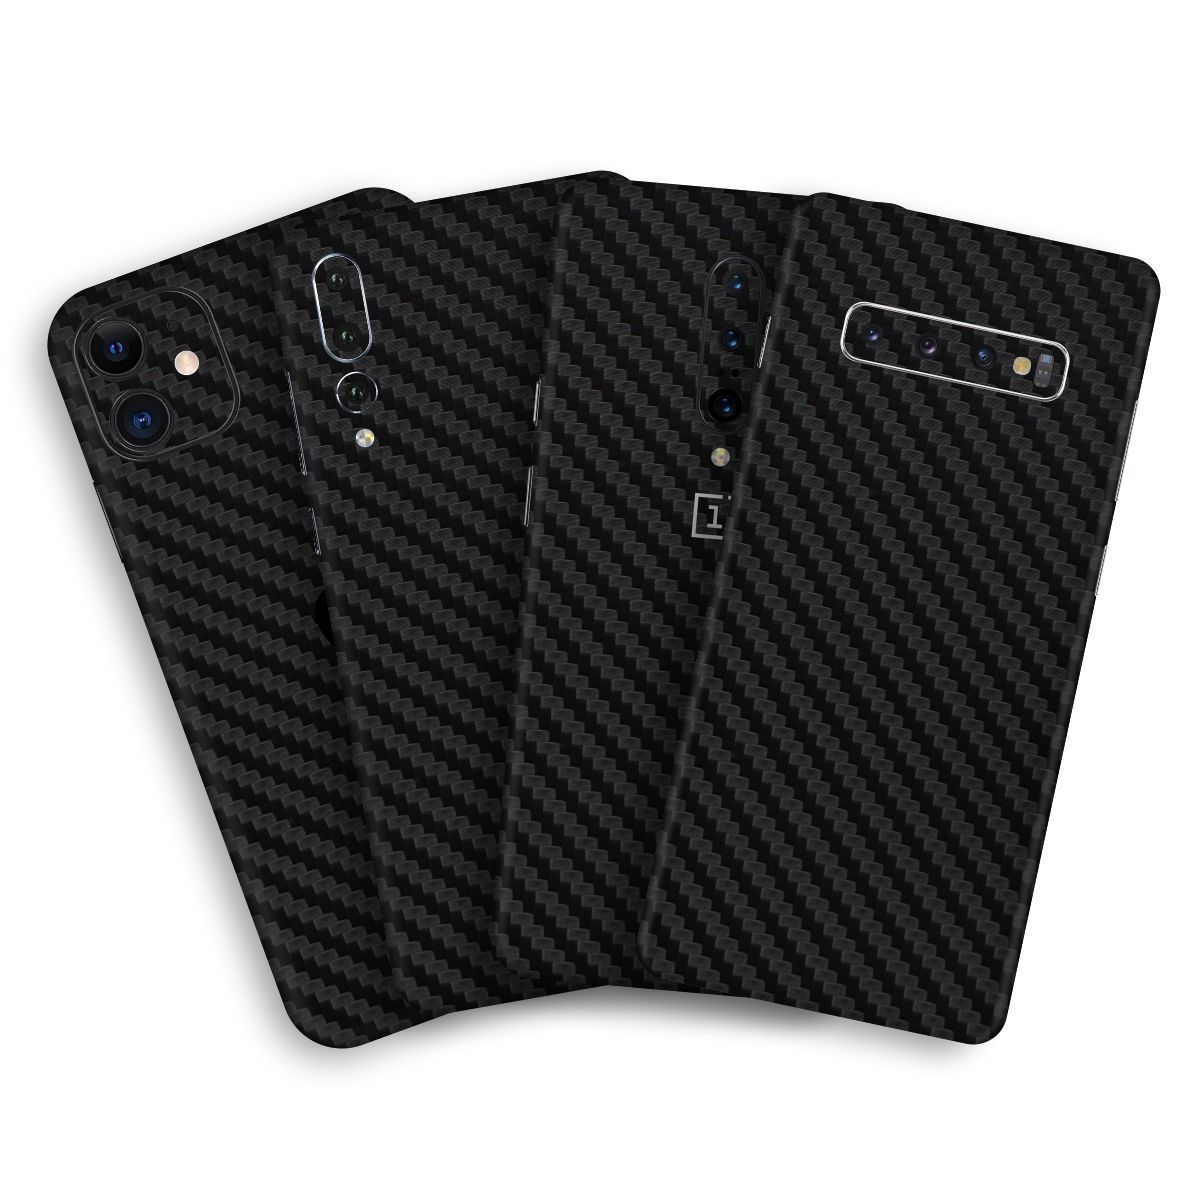 Black Carbon Mobile Skin / Mobile Wrap for Apple Iphone 7